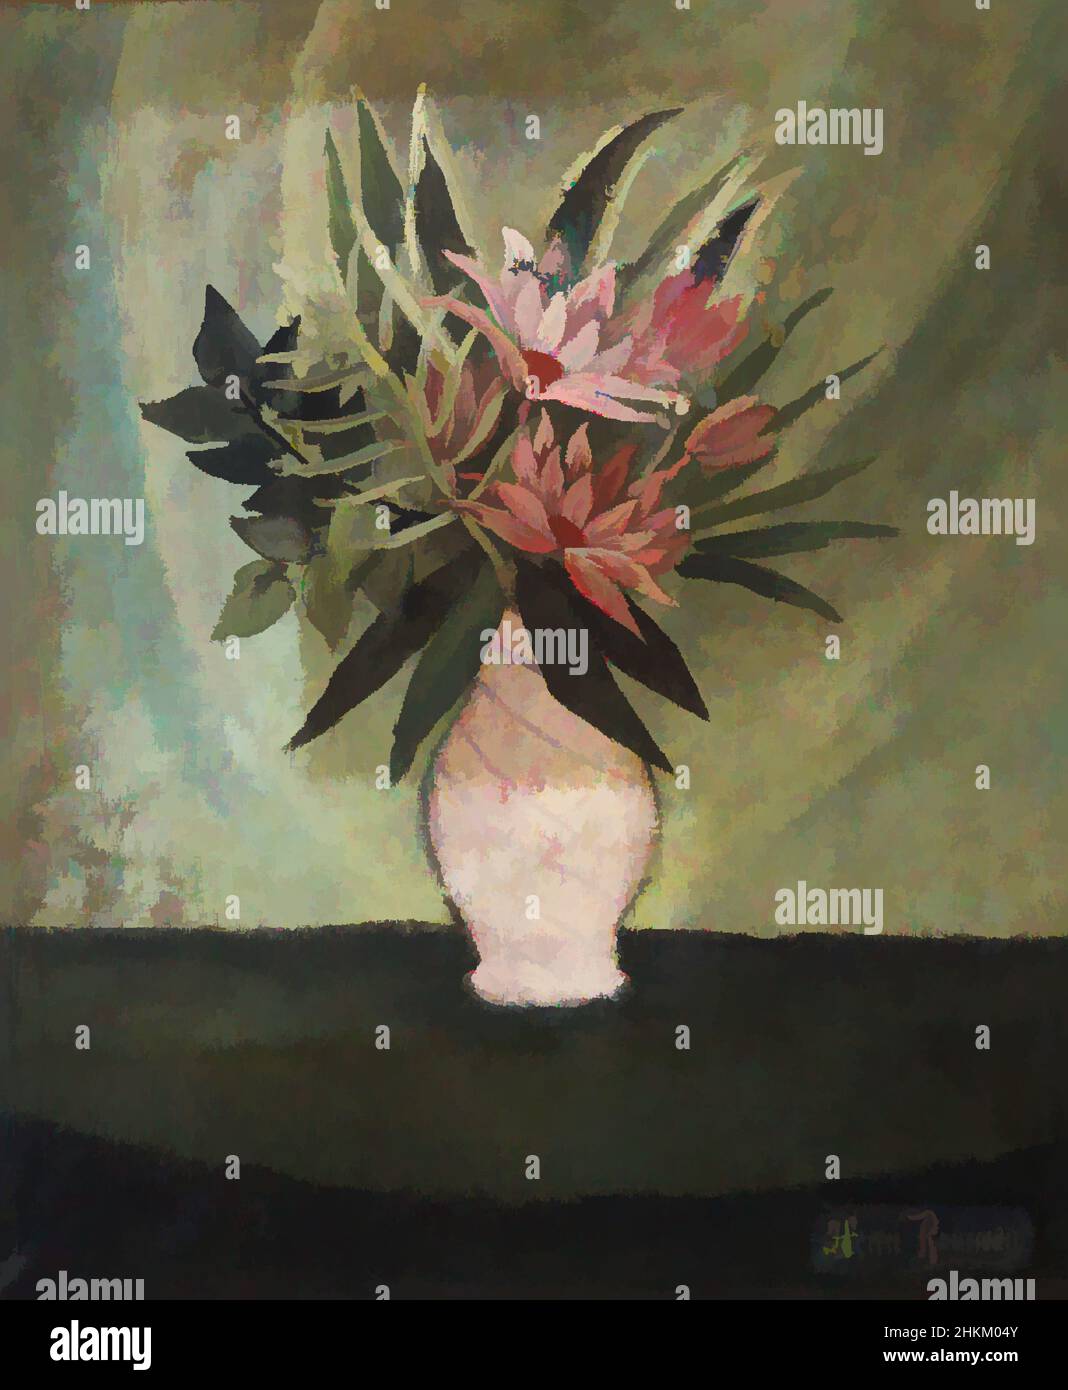 Art inspired by Still Life, Vase of Flowers, Unknown, 19th-20th century, Oil on canvas, Paintings, 21 3/4 x 18 1/4 in. (55.2 x 46.4 cm, Classic works modernized by Artotop with a splash of modernity. Shapes, color and value, eye-catching visual impact on art. Emotions through freedom of artworks in a contemporary way. A timeless message pursuing a wildly creative new direction. Artists turning to the digital medium and creating the Artotop NFT Stock Photo